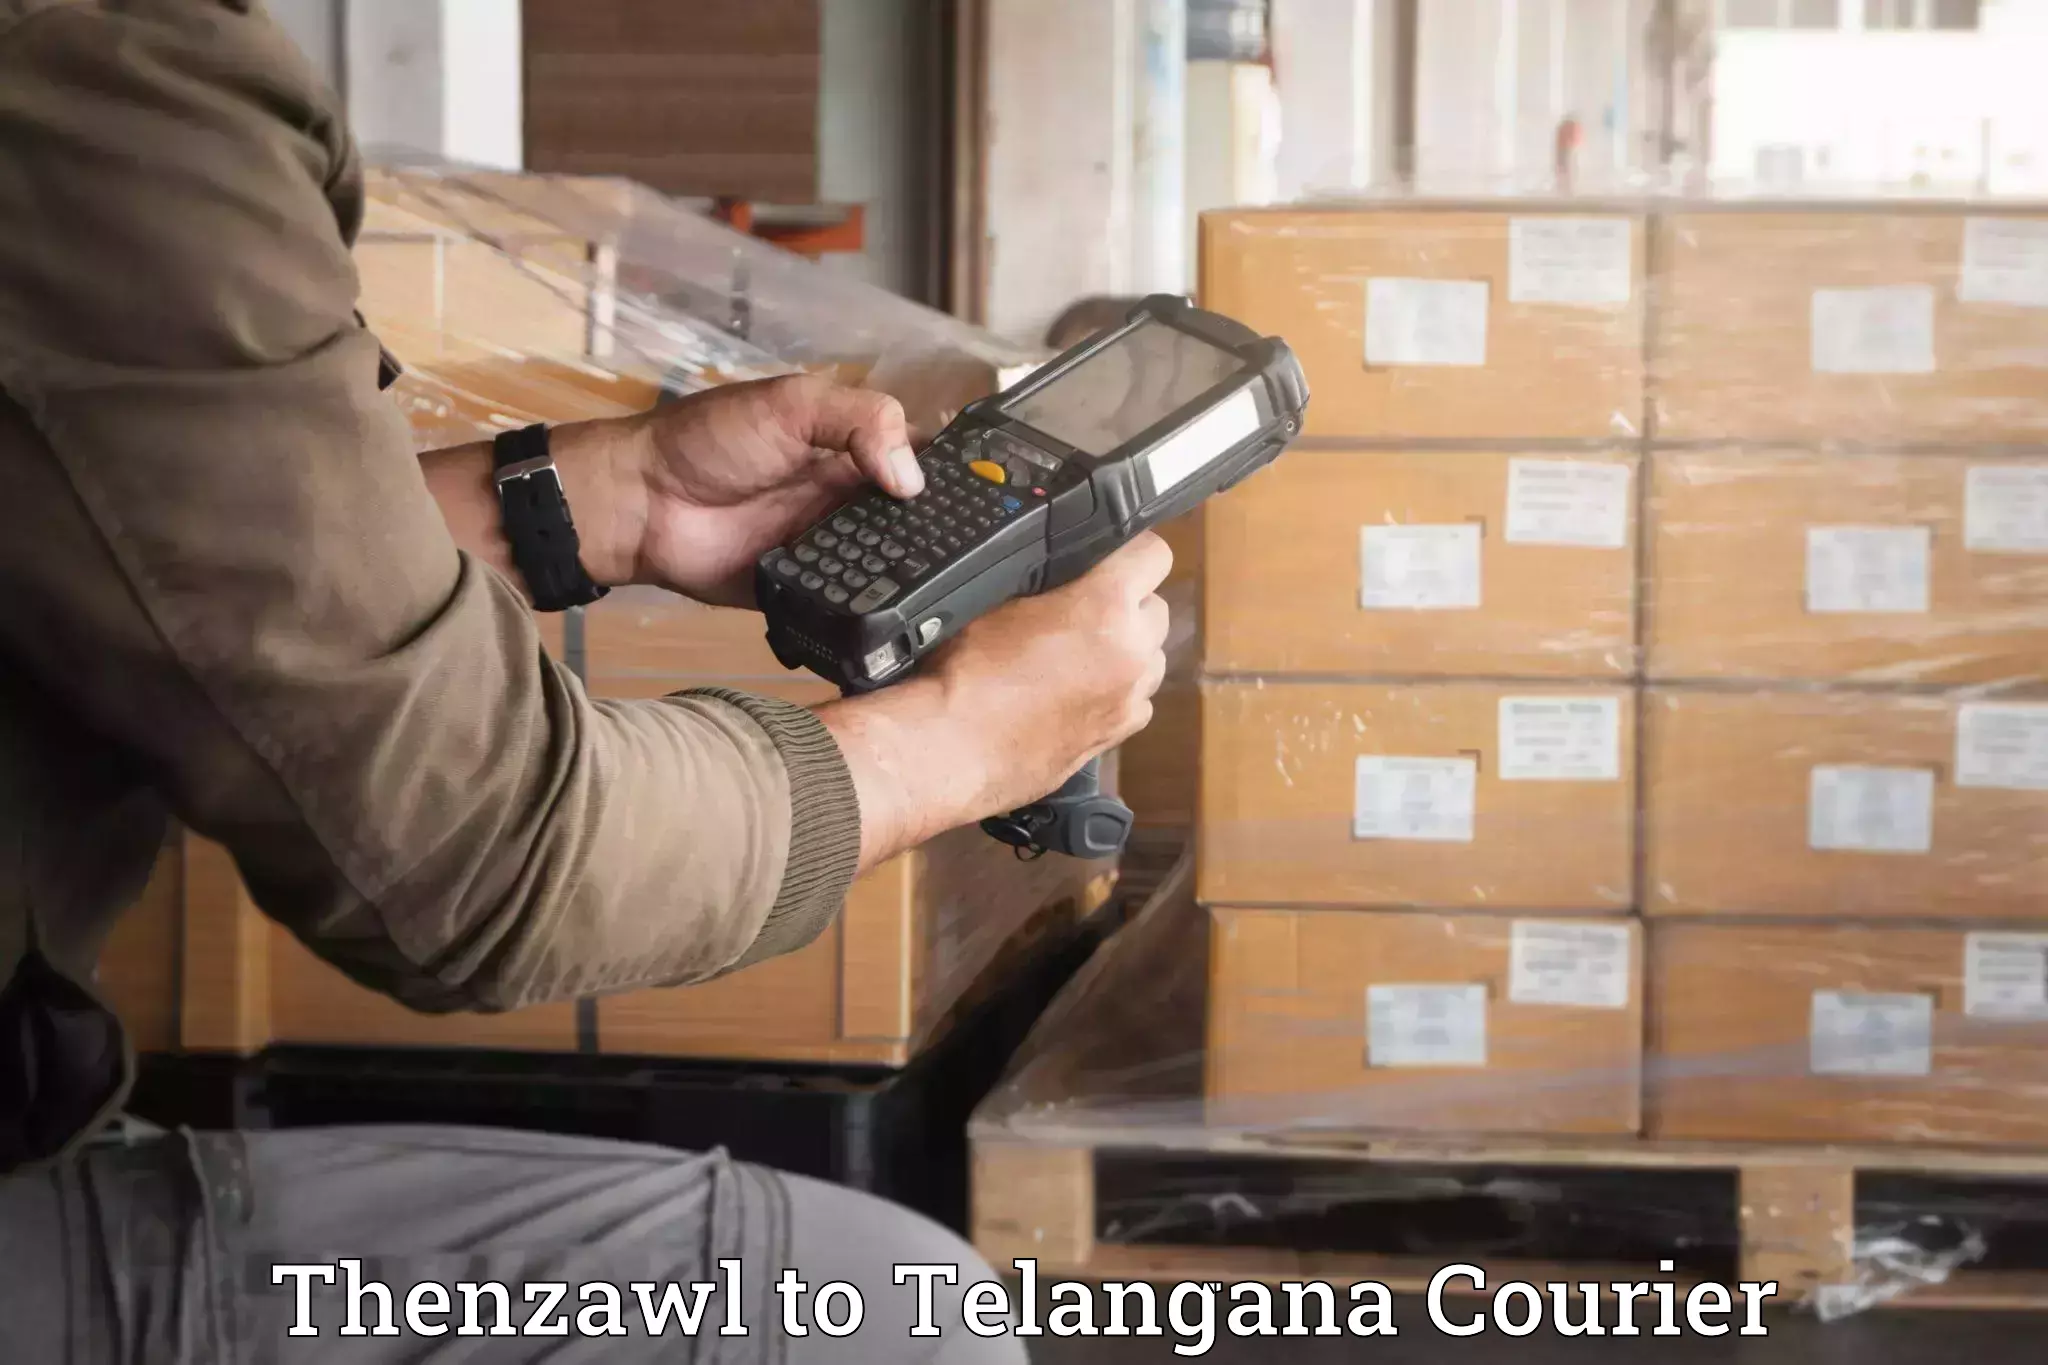 Specialized moving company Thenzawl to Bhainsa